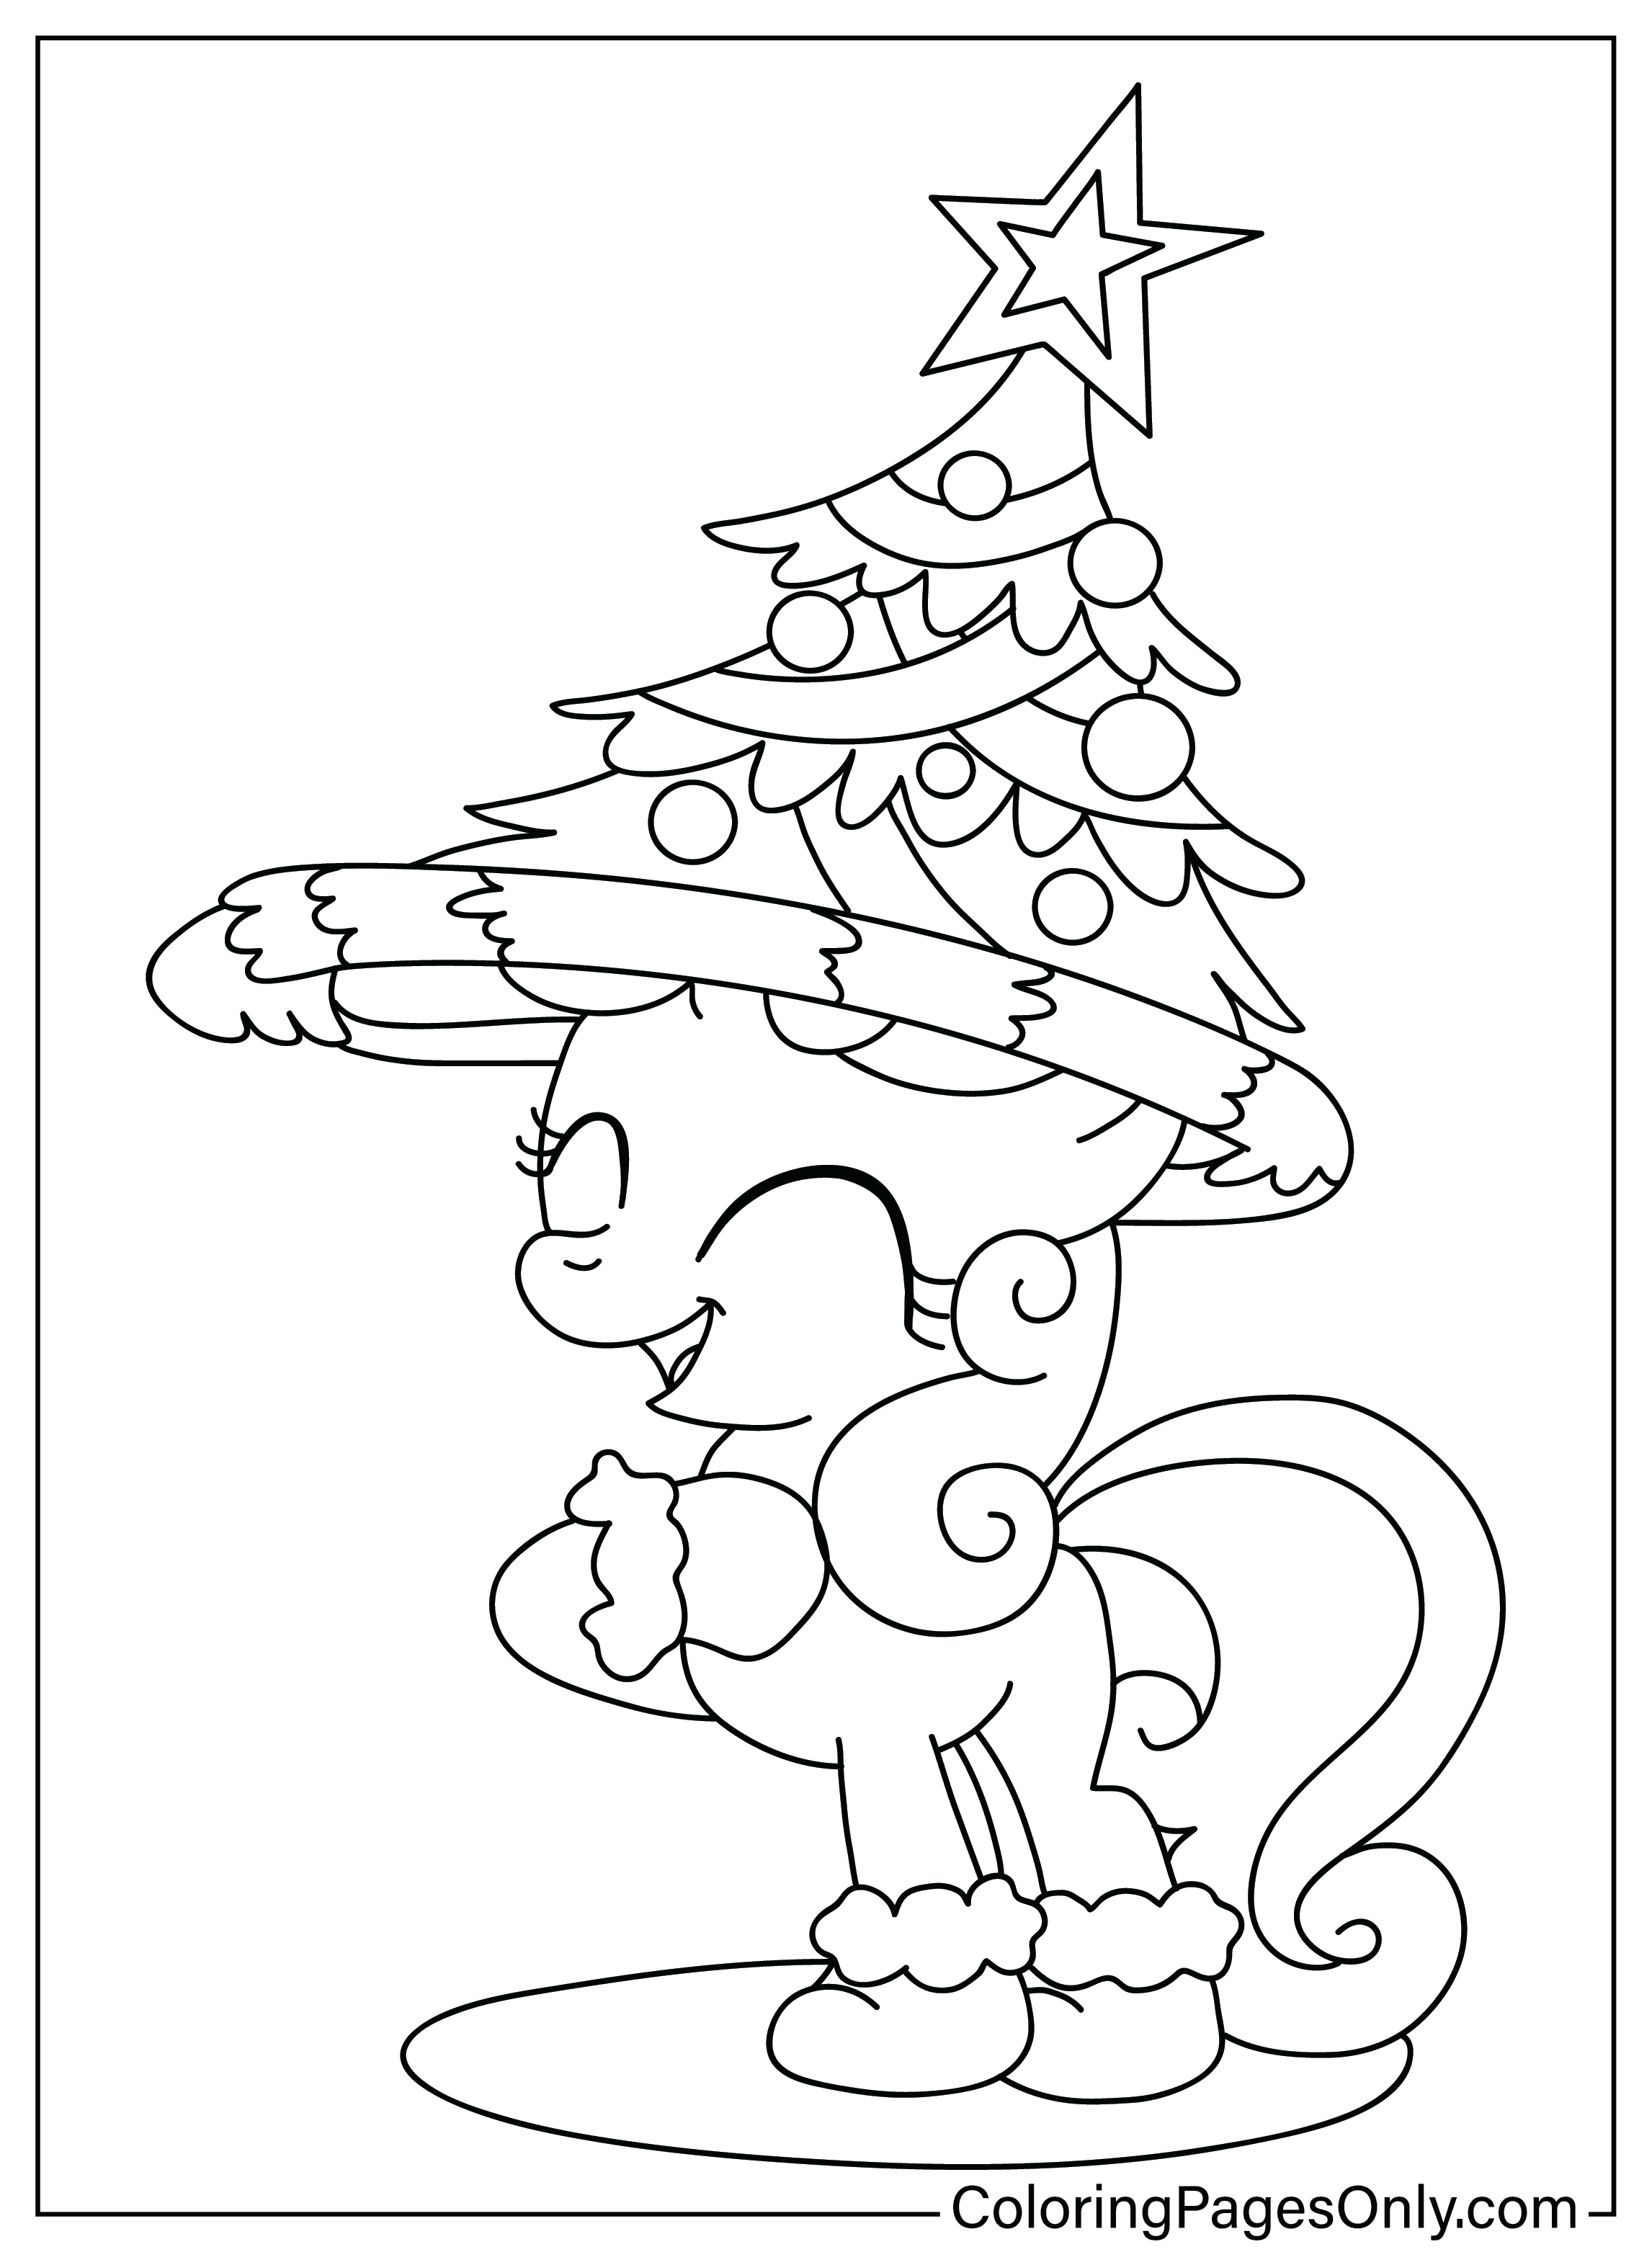 Christmas Poni Coloring Page from Christmas Cartoon